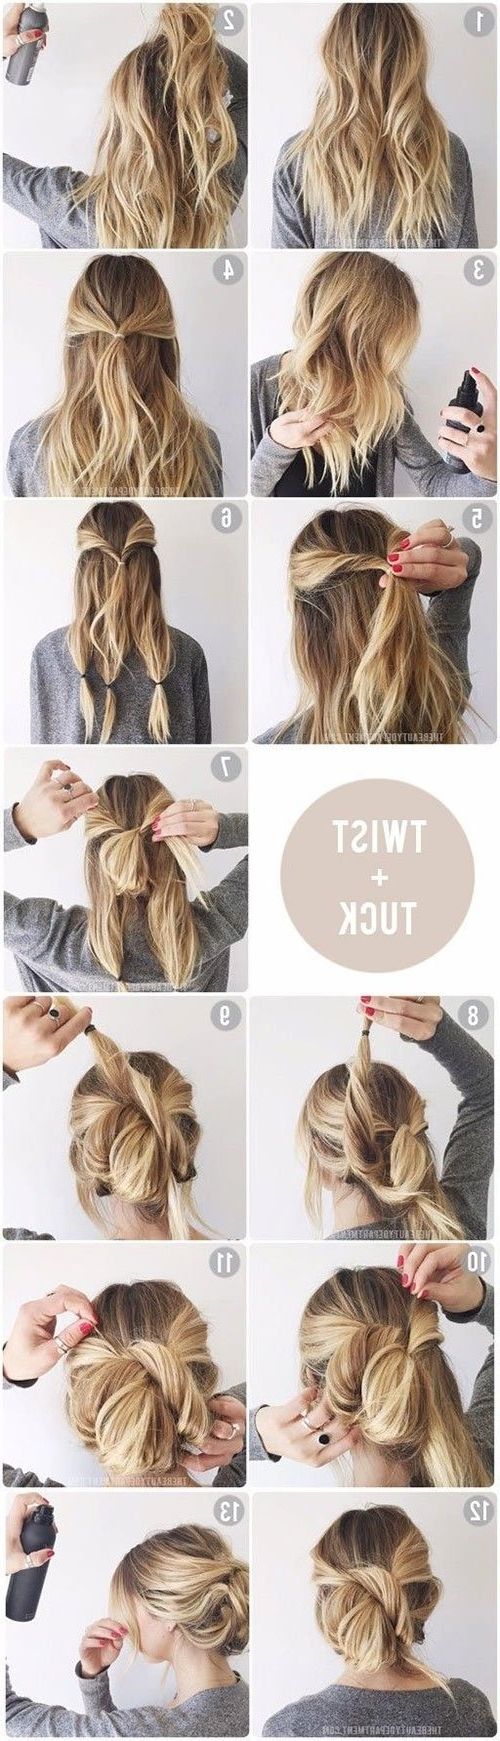 Long Hair Updos, How To Style For Prom, Hairstyle Tutorials Inside Easiest Updo Hairstyles For Long Hair (View 9 of 15)